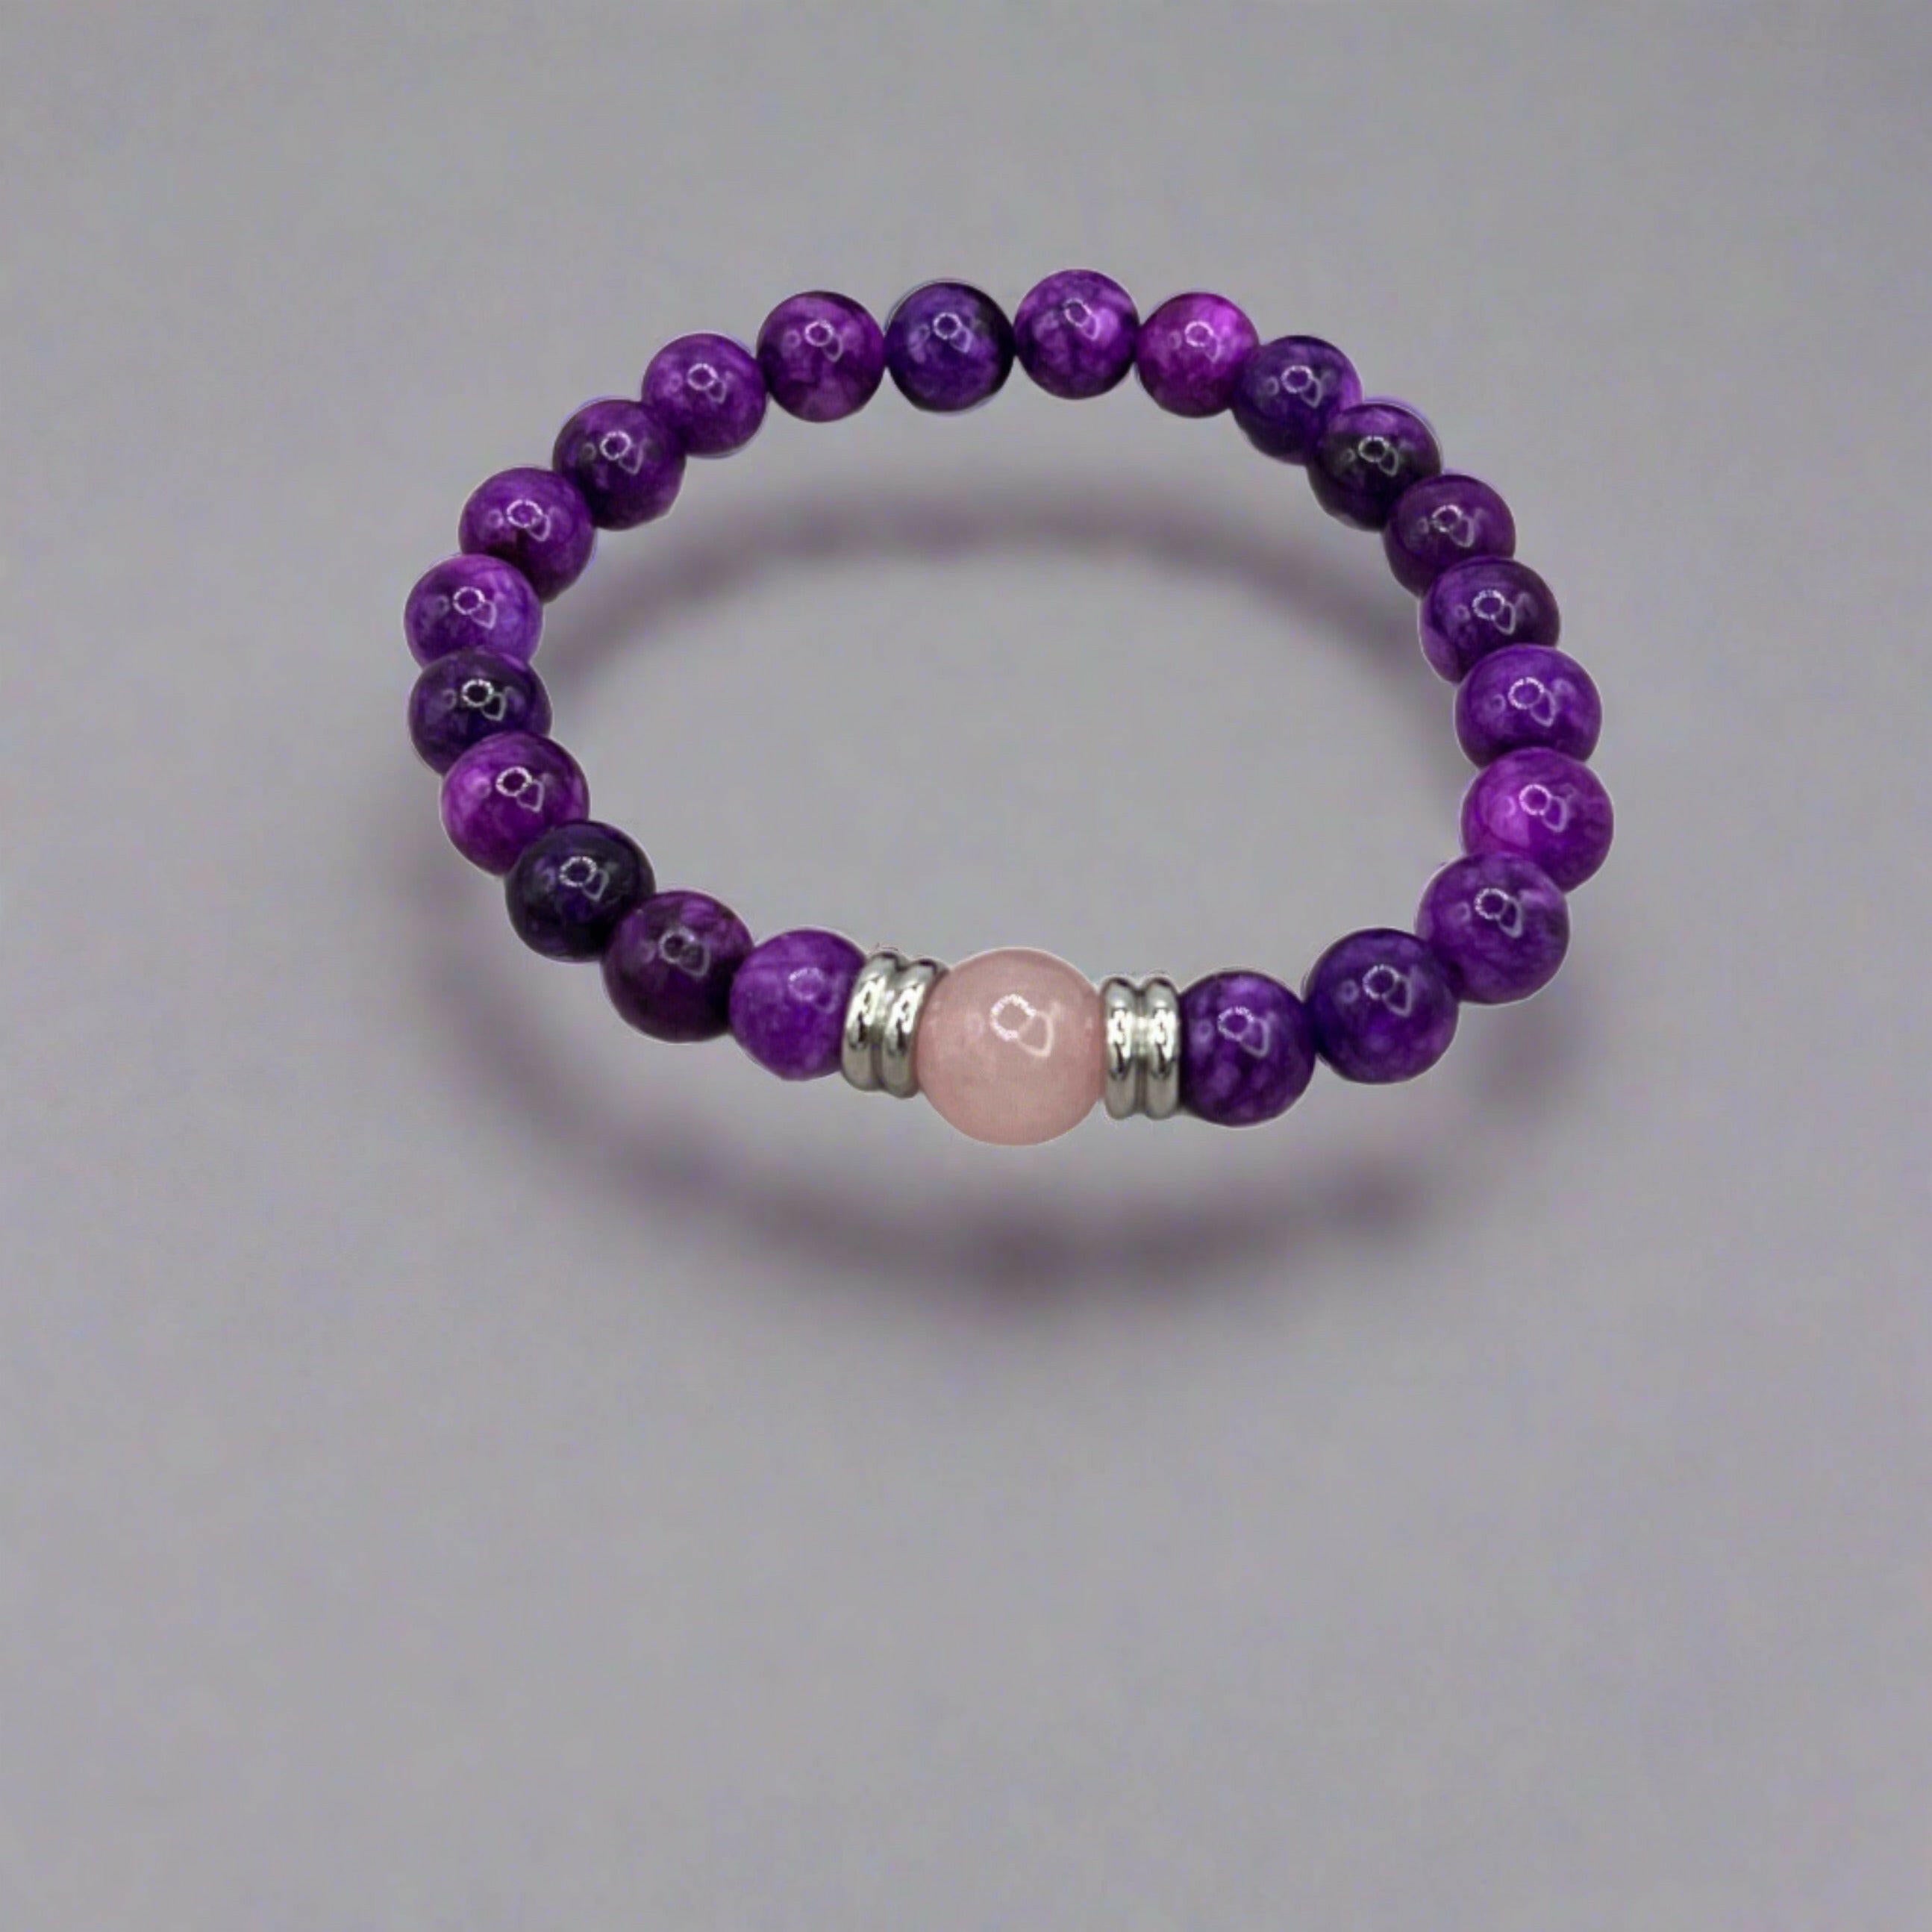 Bec Sue Jewelry Shop new 6.5 / purple/ pink / sugilite 8mm/one 10mm rose quartz One-of-a-kind Sugilite 8mm Bead Bracelet with Rose Quartz Accent & Sterling Silver Spacers Tags 624